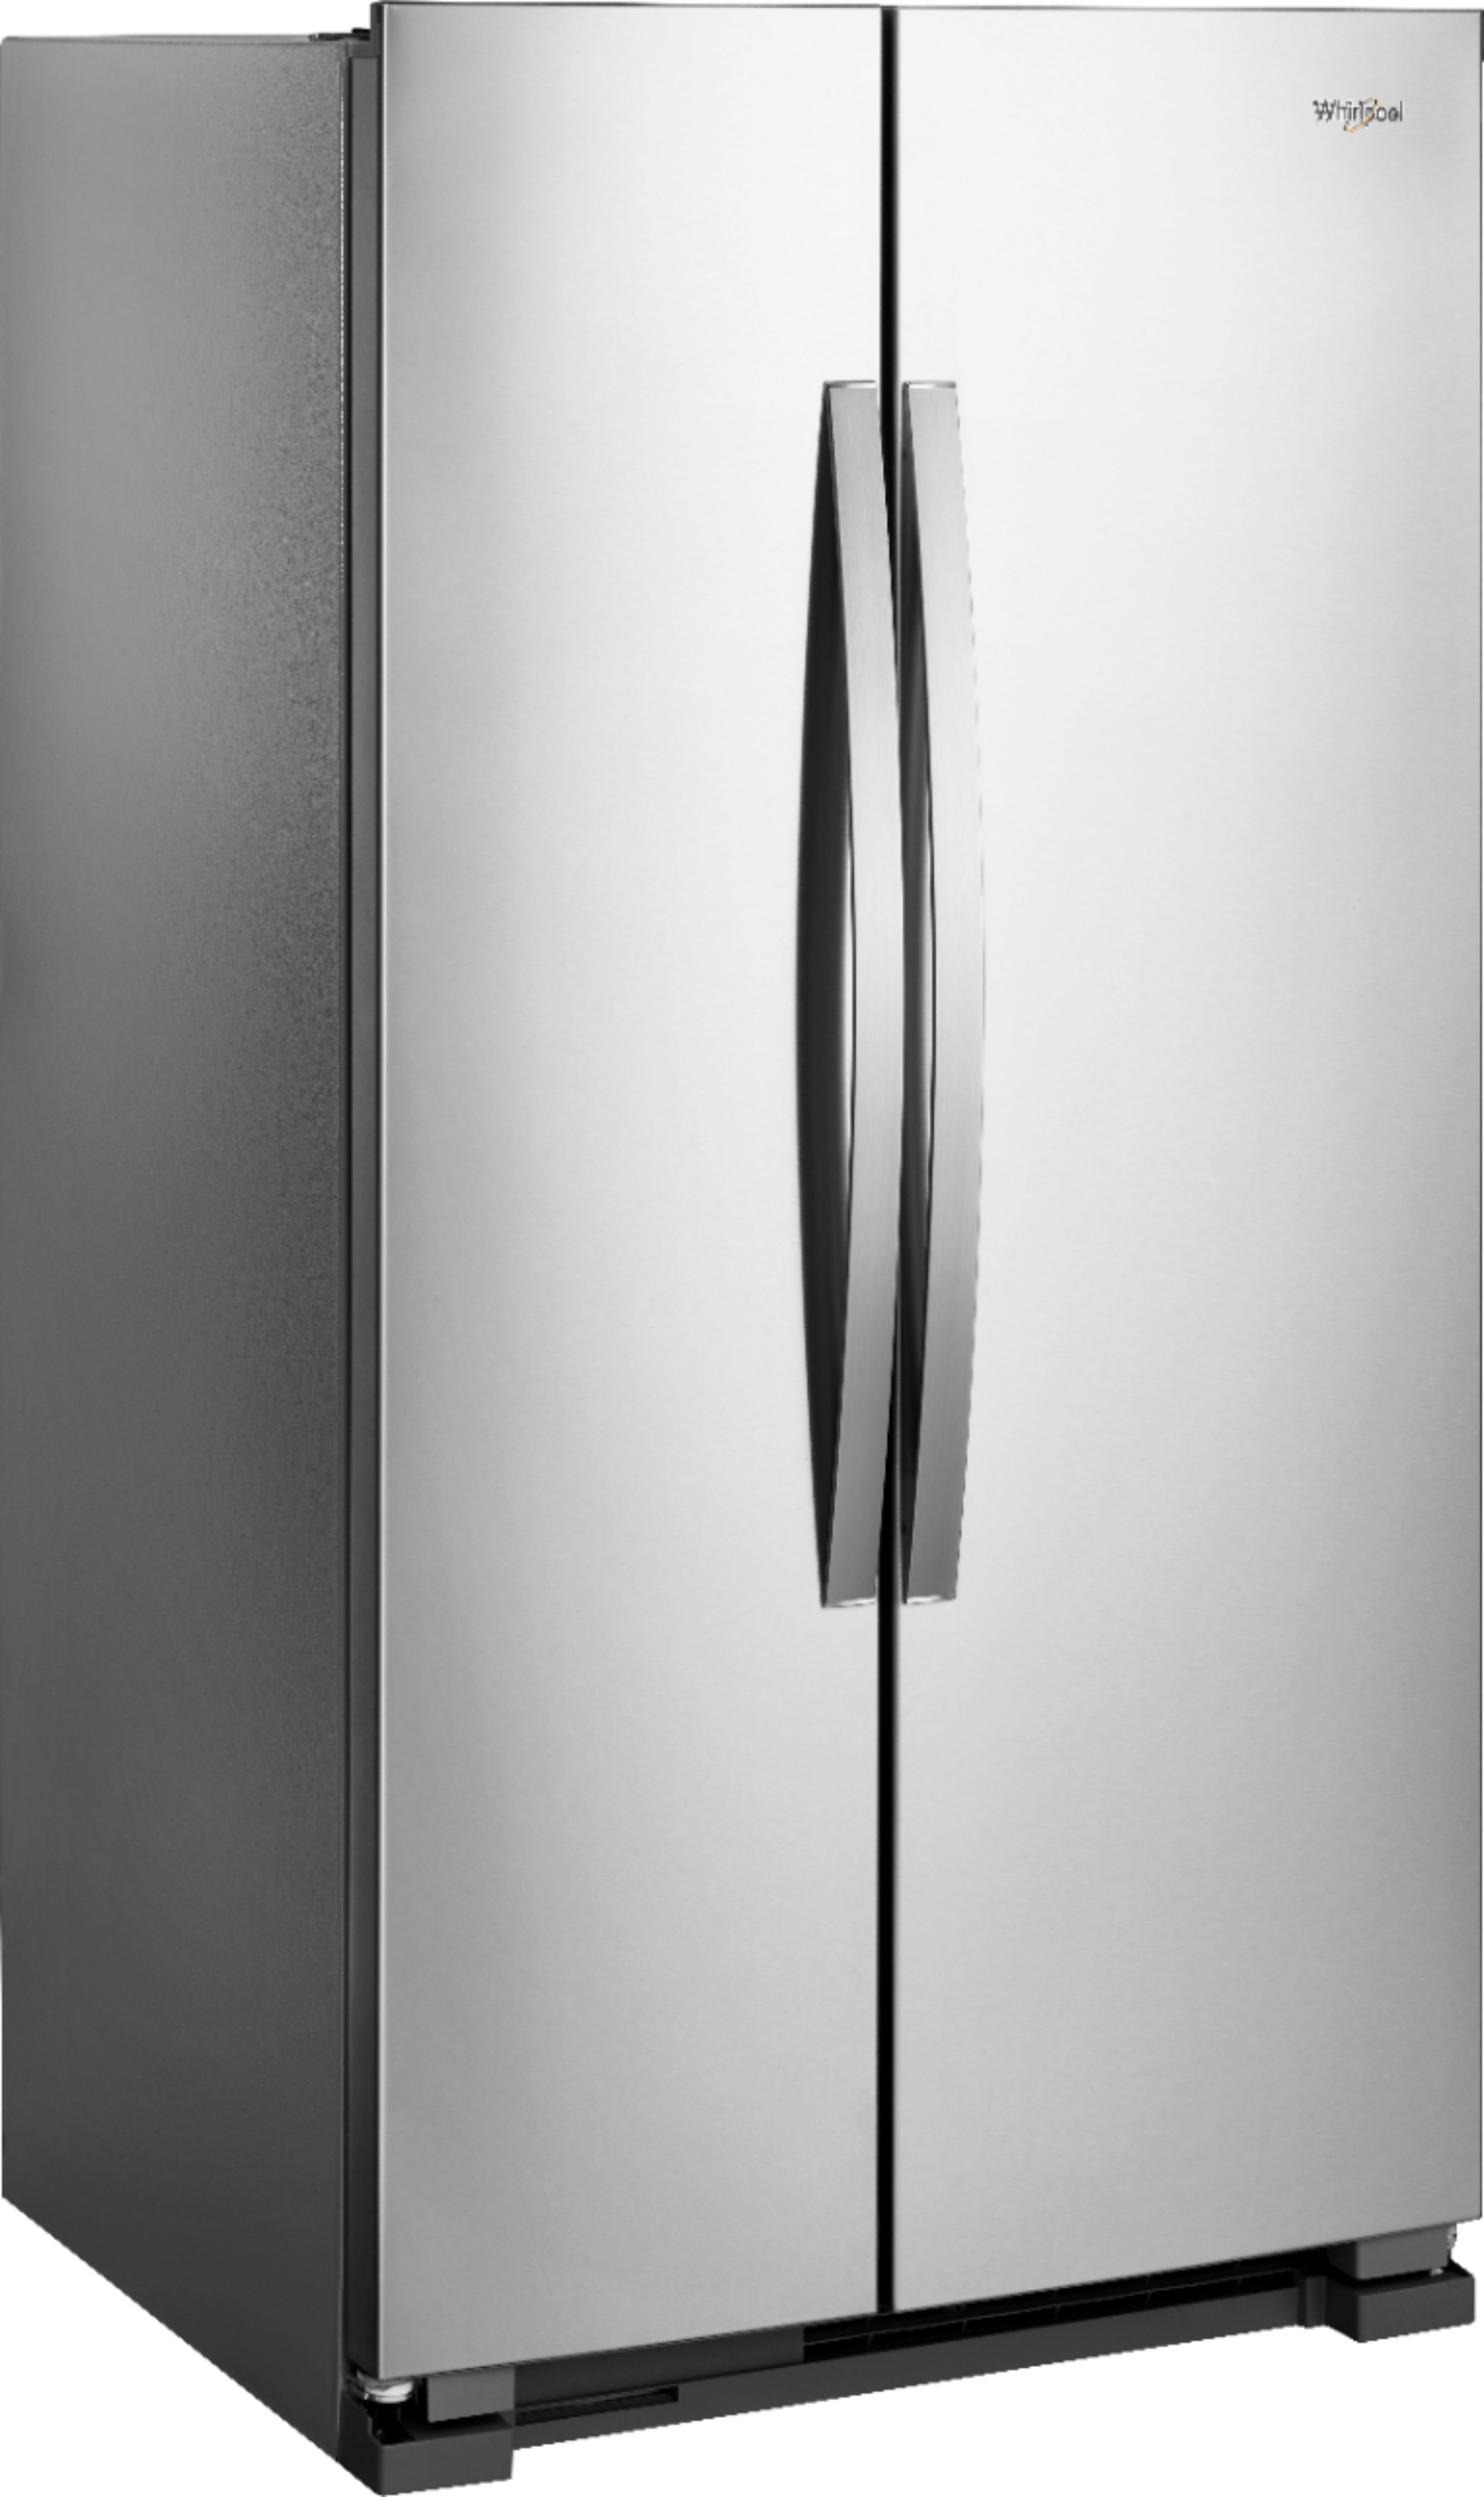 Angle View: Whirlpool - 21.7 Cu. Ft. Side-by-Side Refrigerator - Monochromatic stainless steel